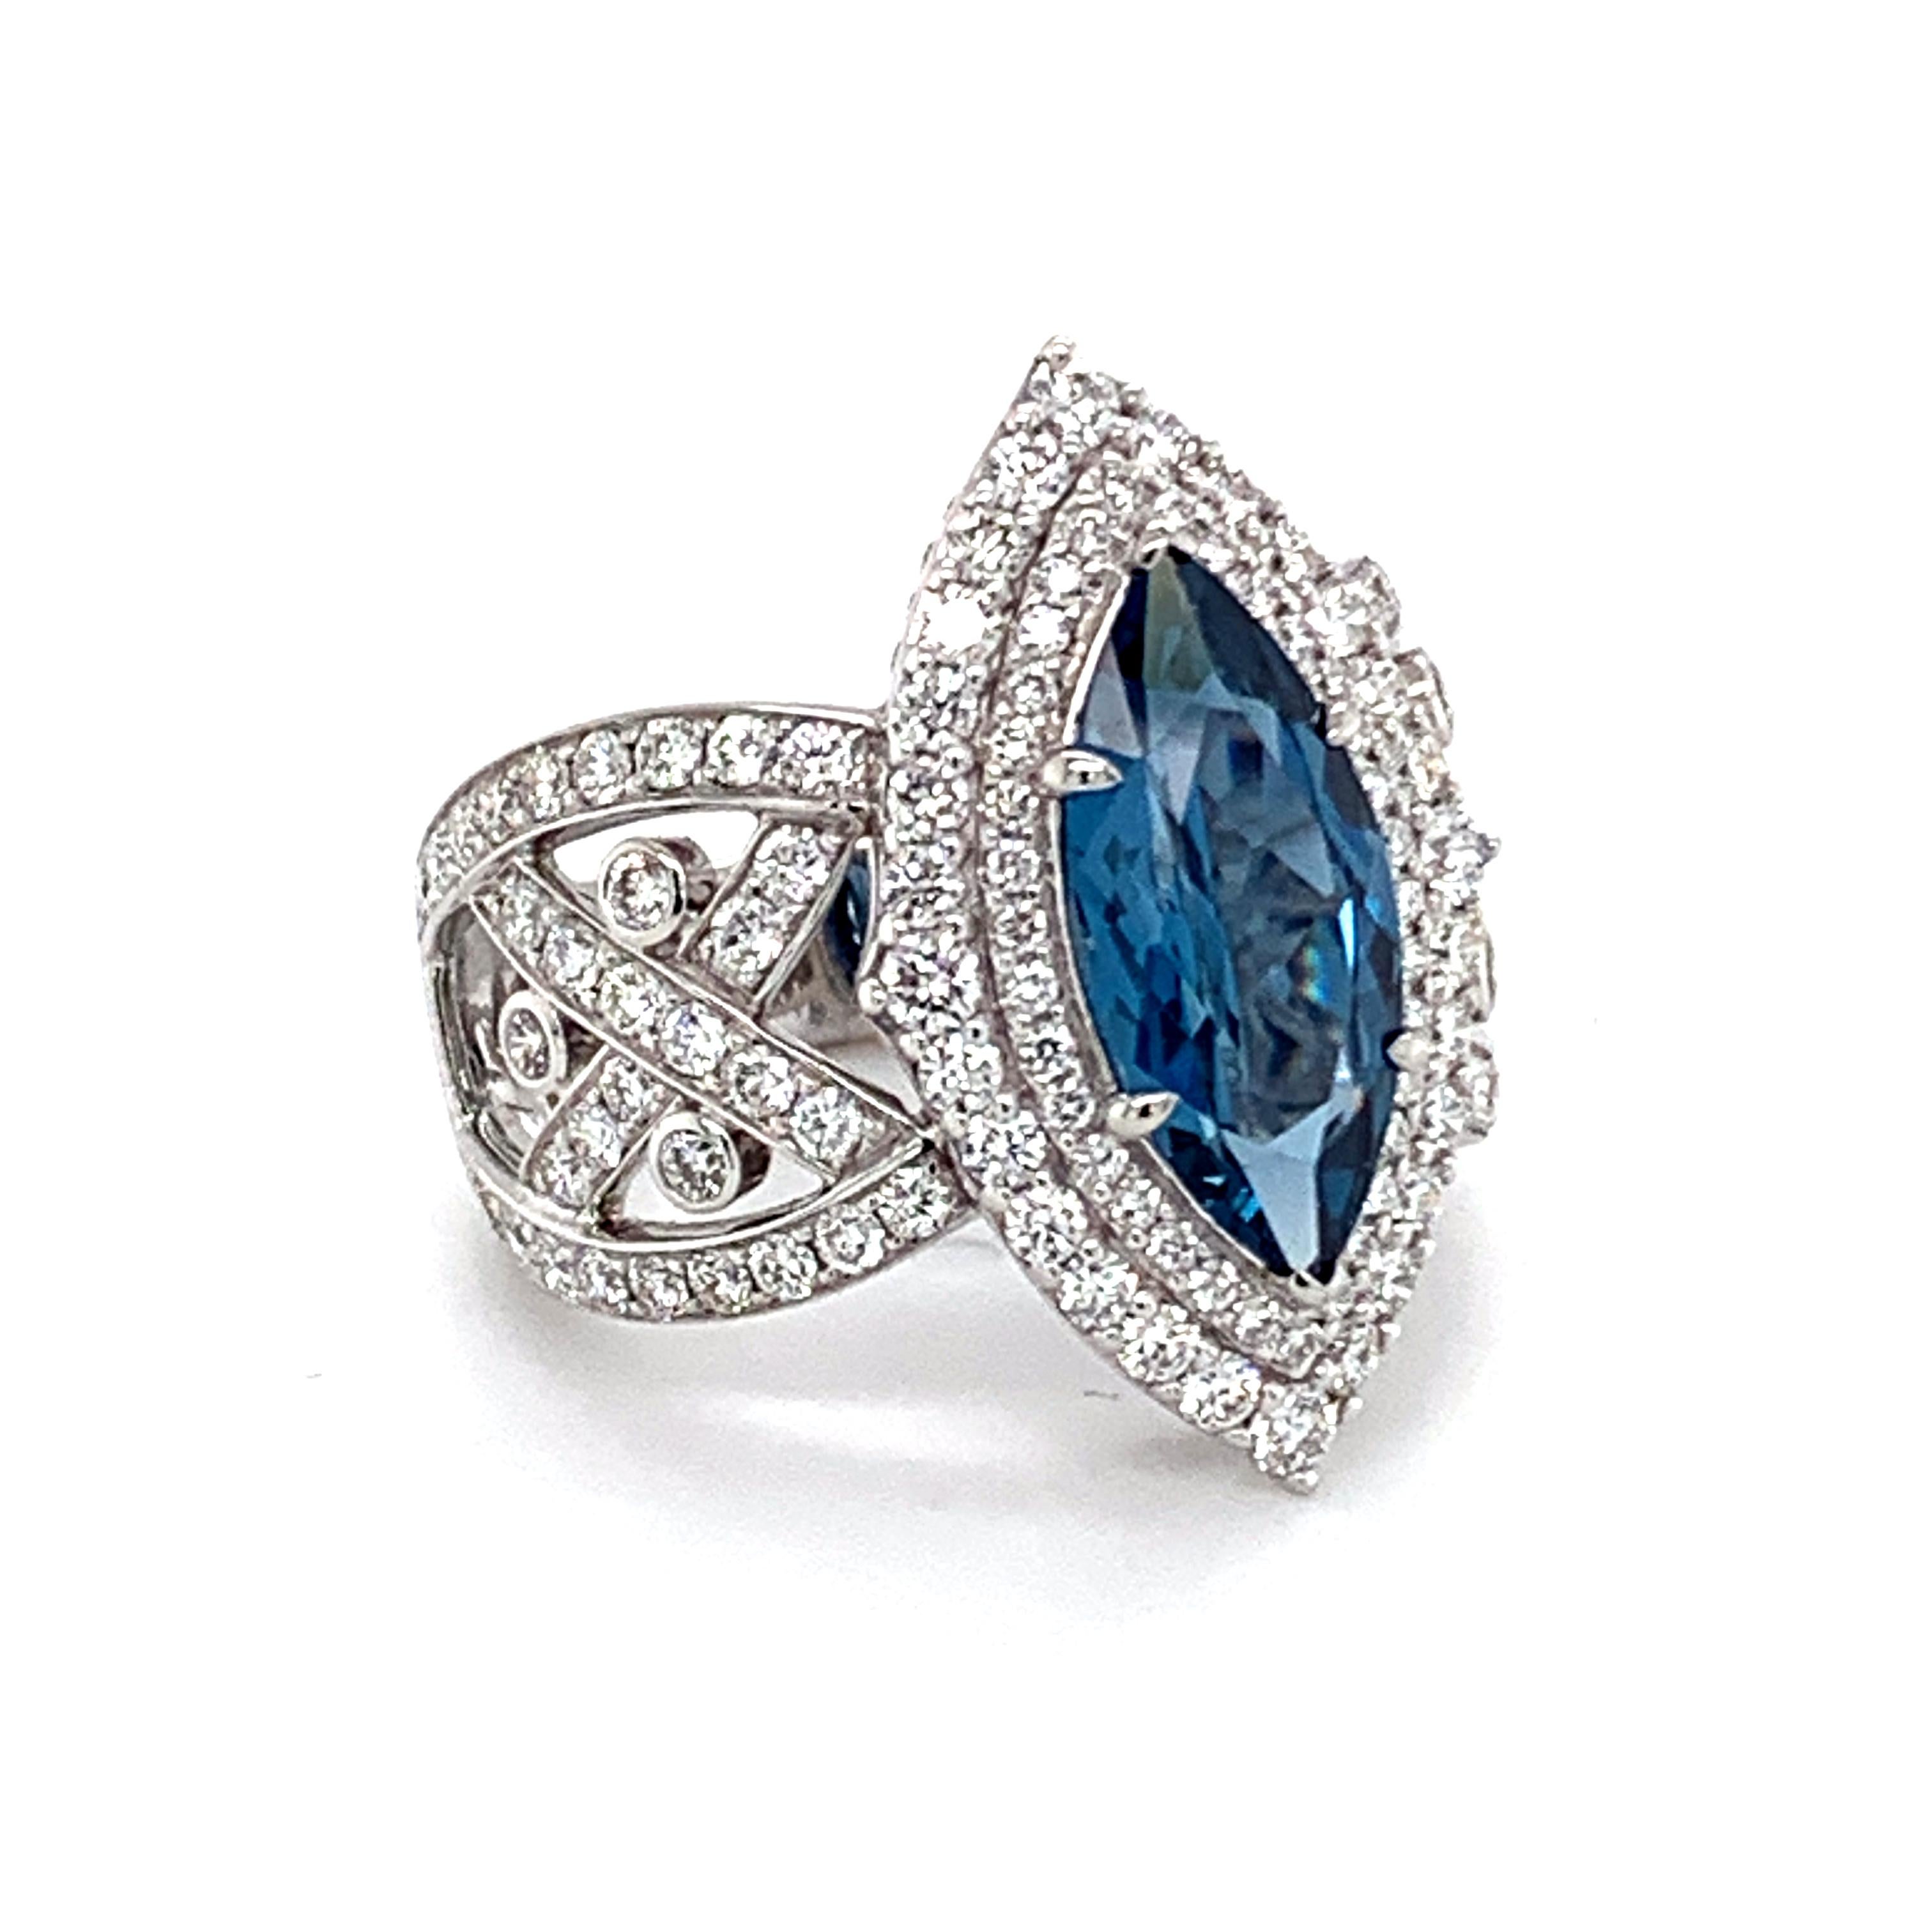 Stunning one of the kind ring in solid platinum  designed by Danuta set with center marque shaped intense color Blue Zircon and 1.82 carat pave diamonds FG color VS clarity. 